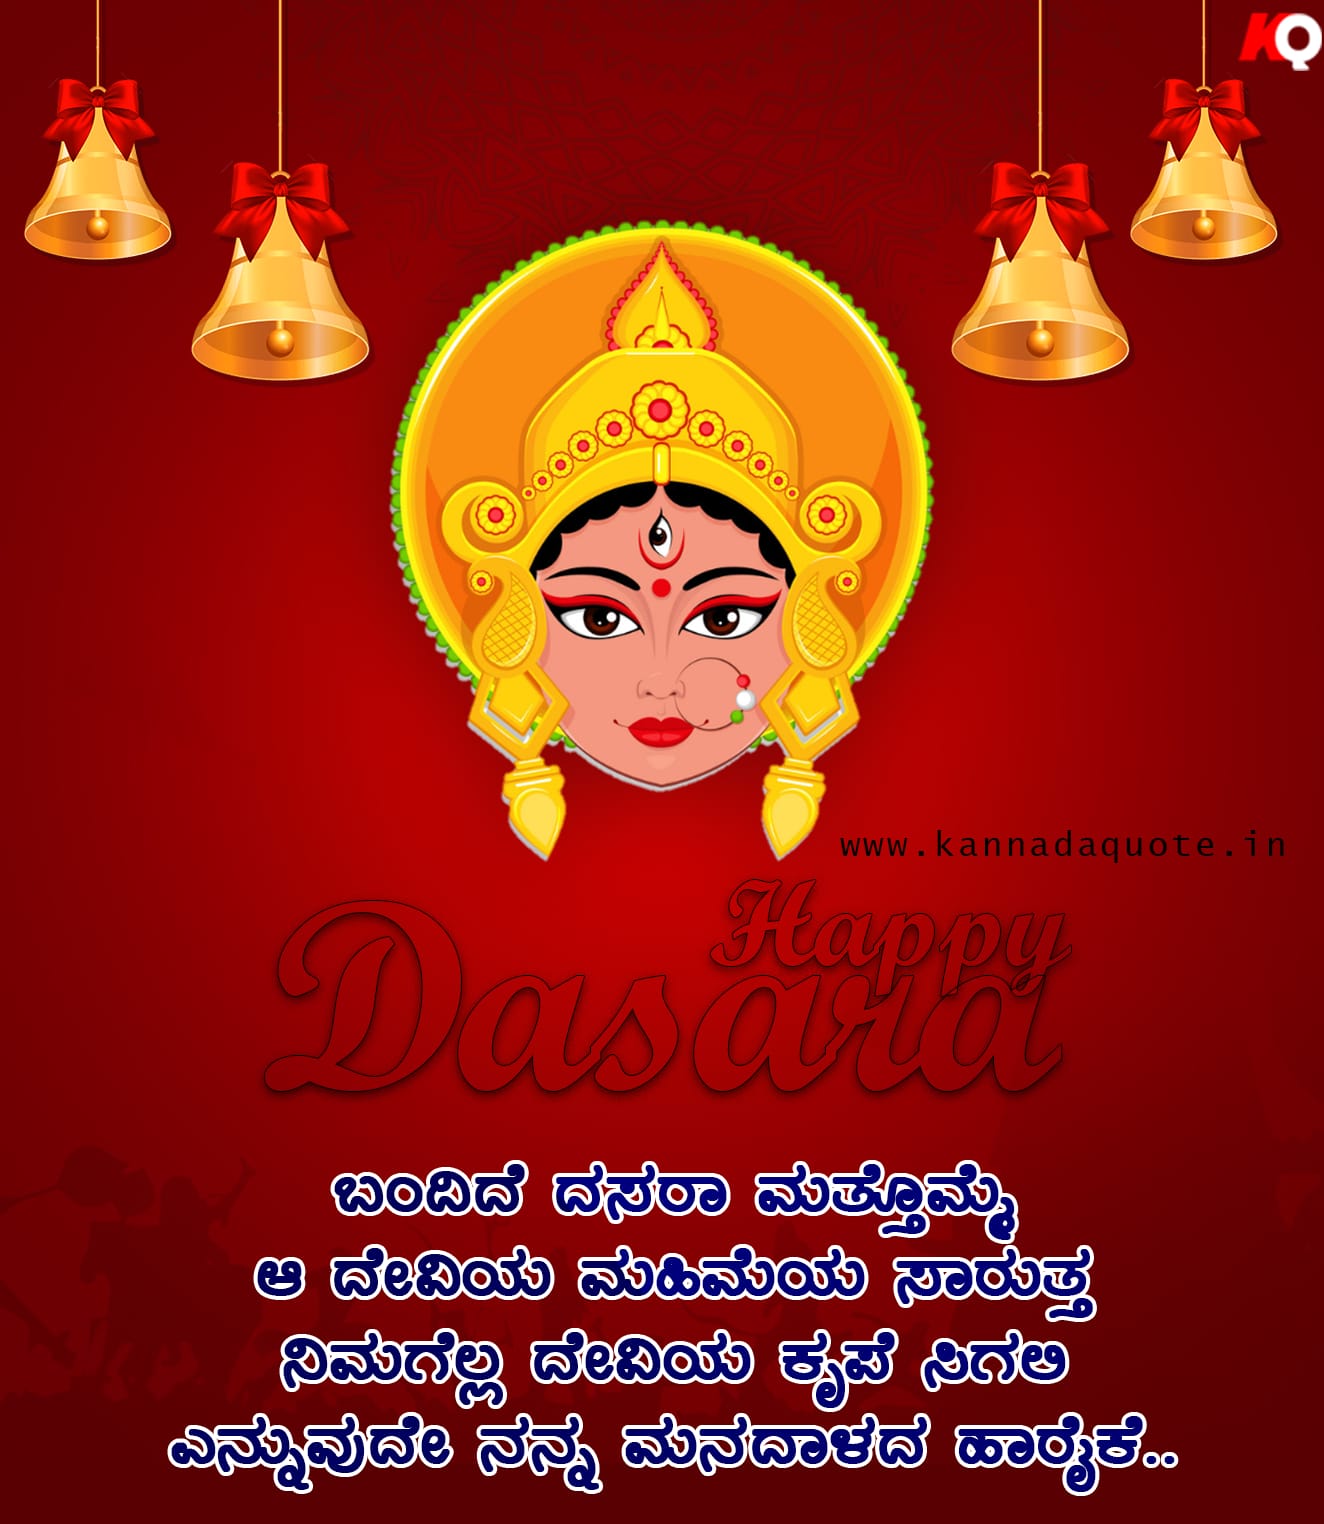 Quotes wishes for Happy Dasara in Kannada language